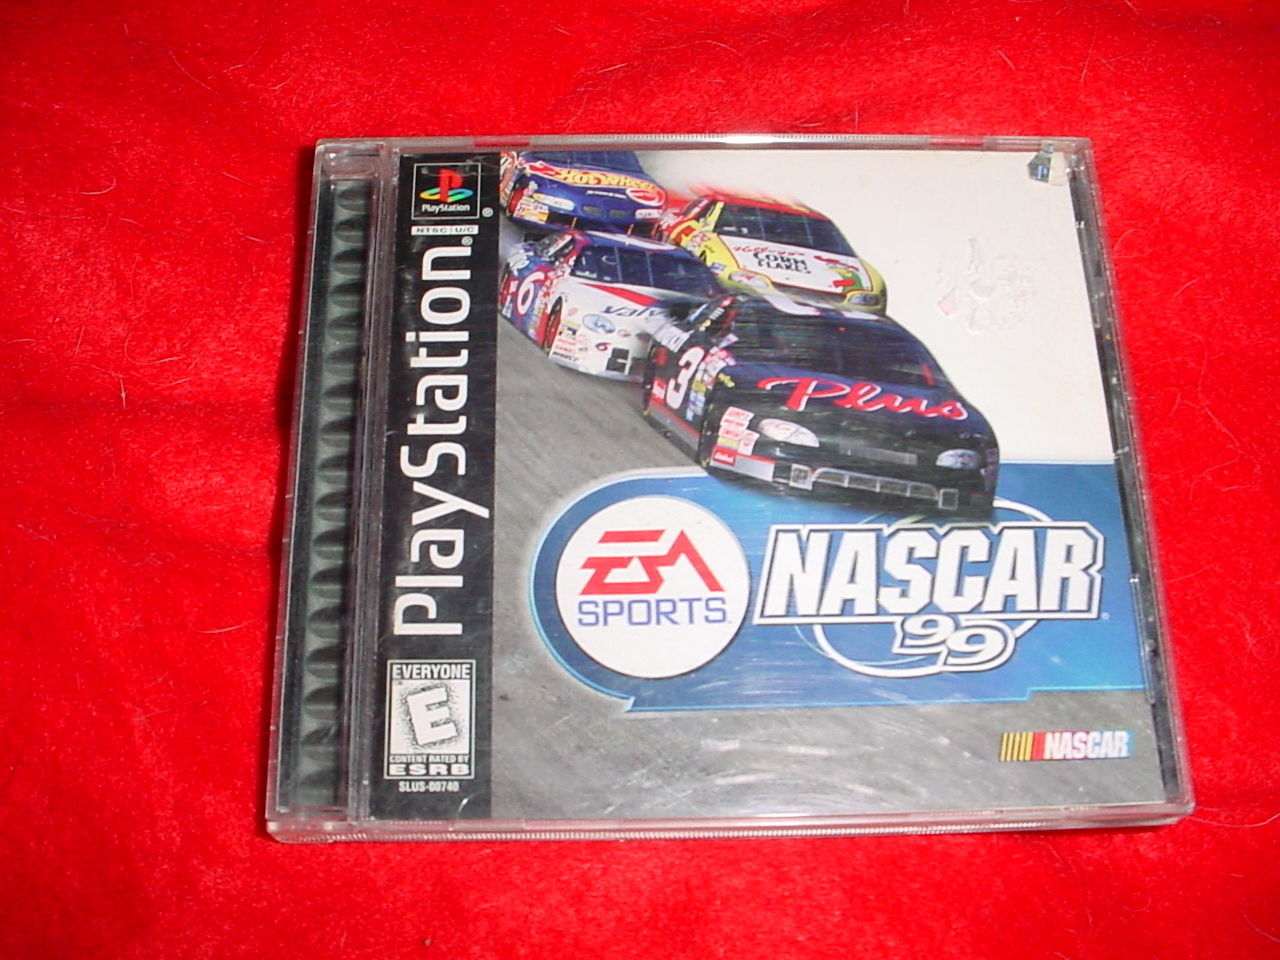 Primary image for NASCAR 99 EA SPORTS PLAYSTATION PS1 GAME IN BOX WITH BOOKLET FREE USA SHIPPING